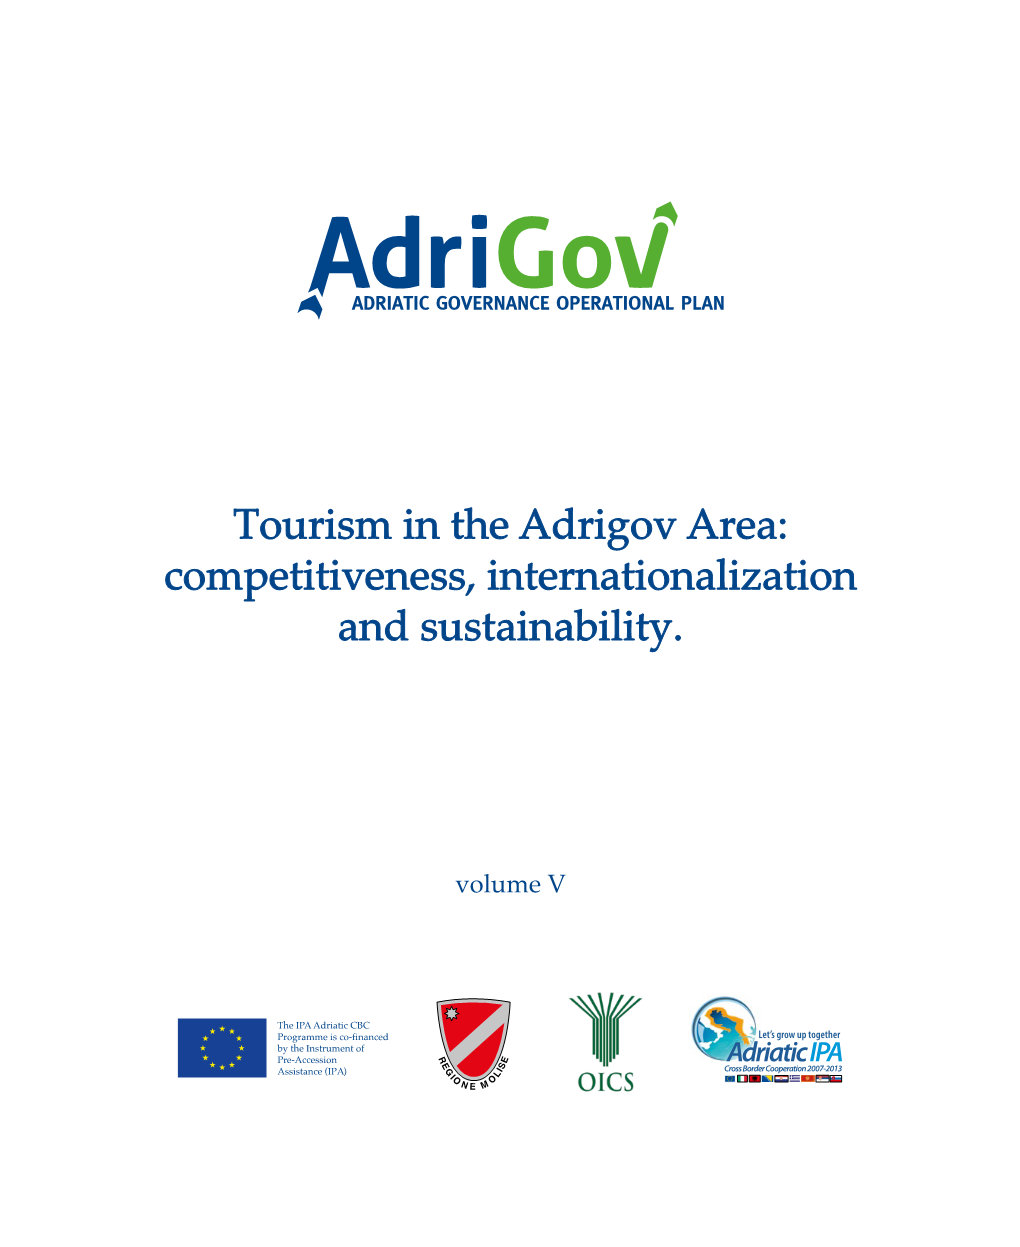 Tourism in the Adrigov Area: Competitiveness, Internationalization and Sustainability